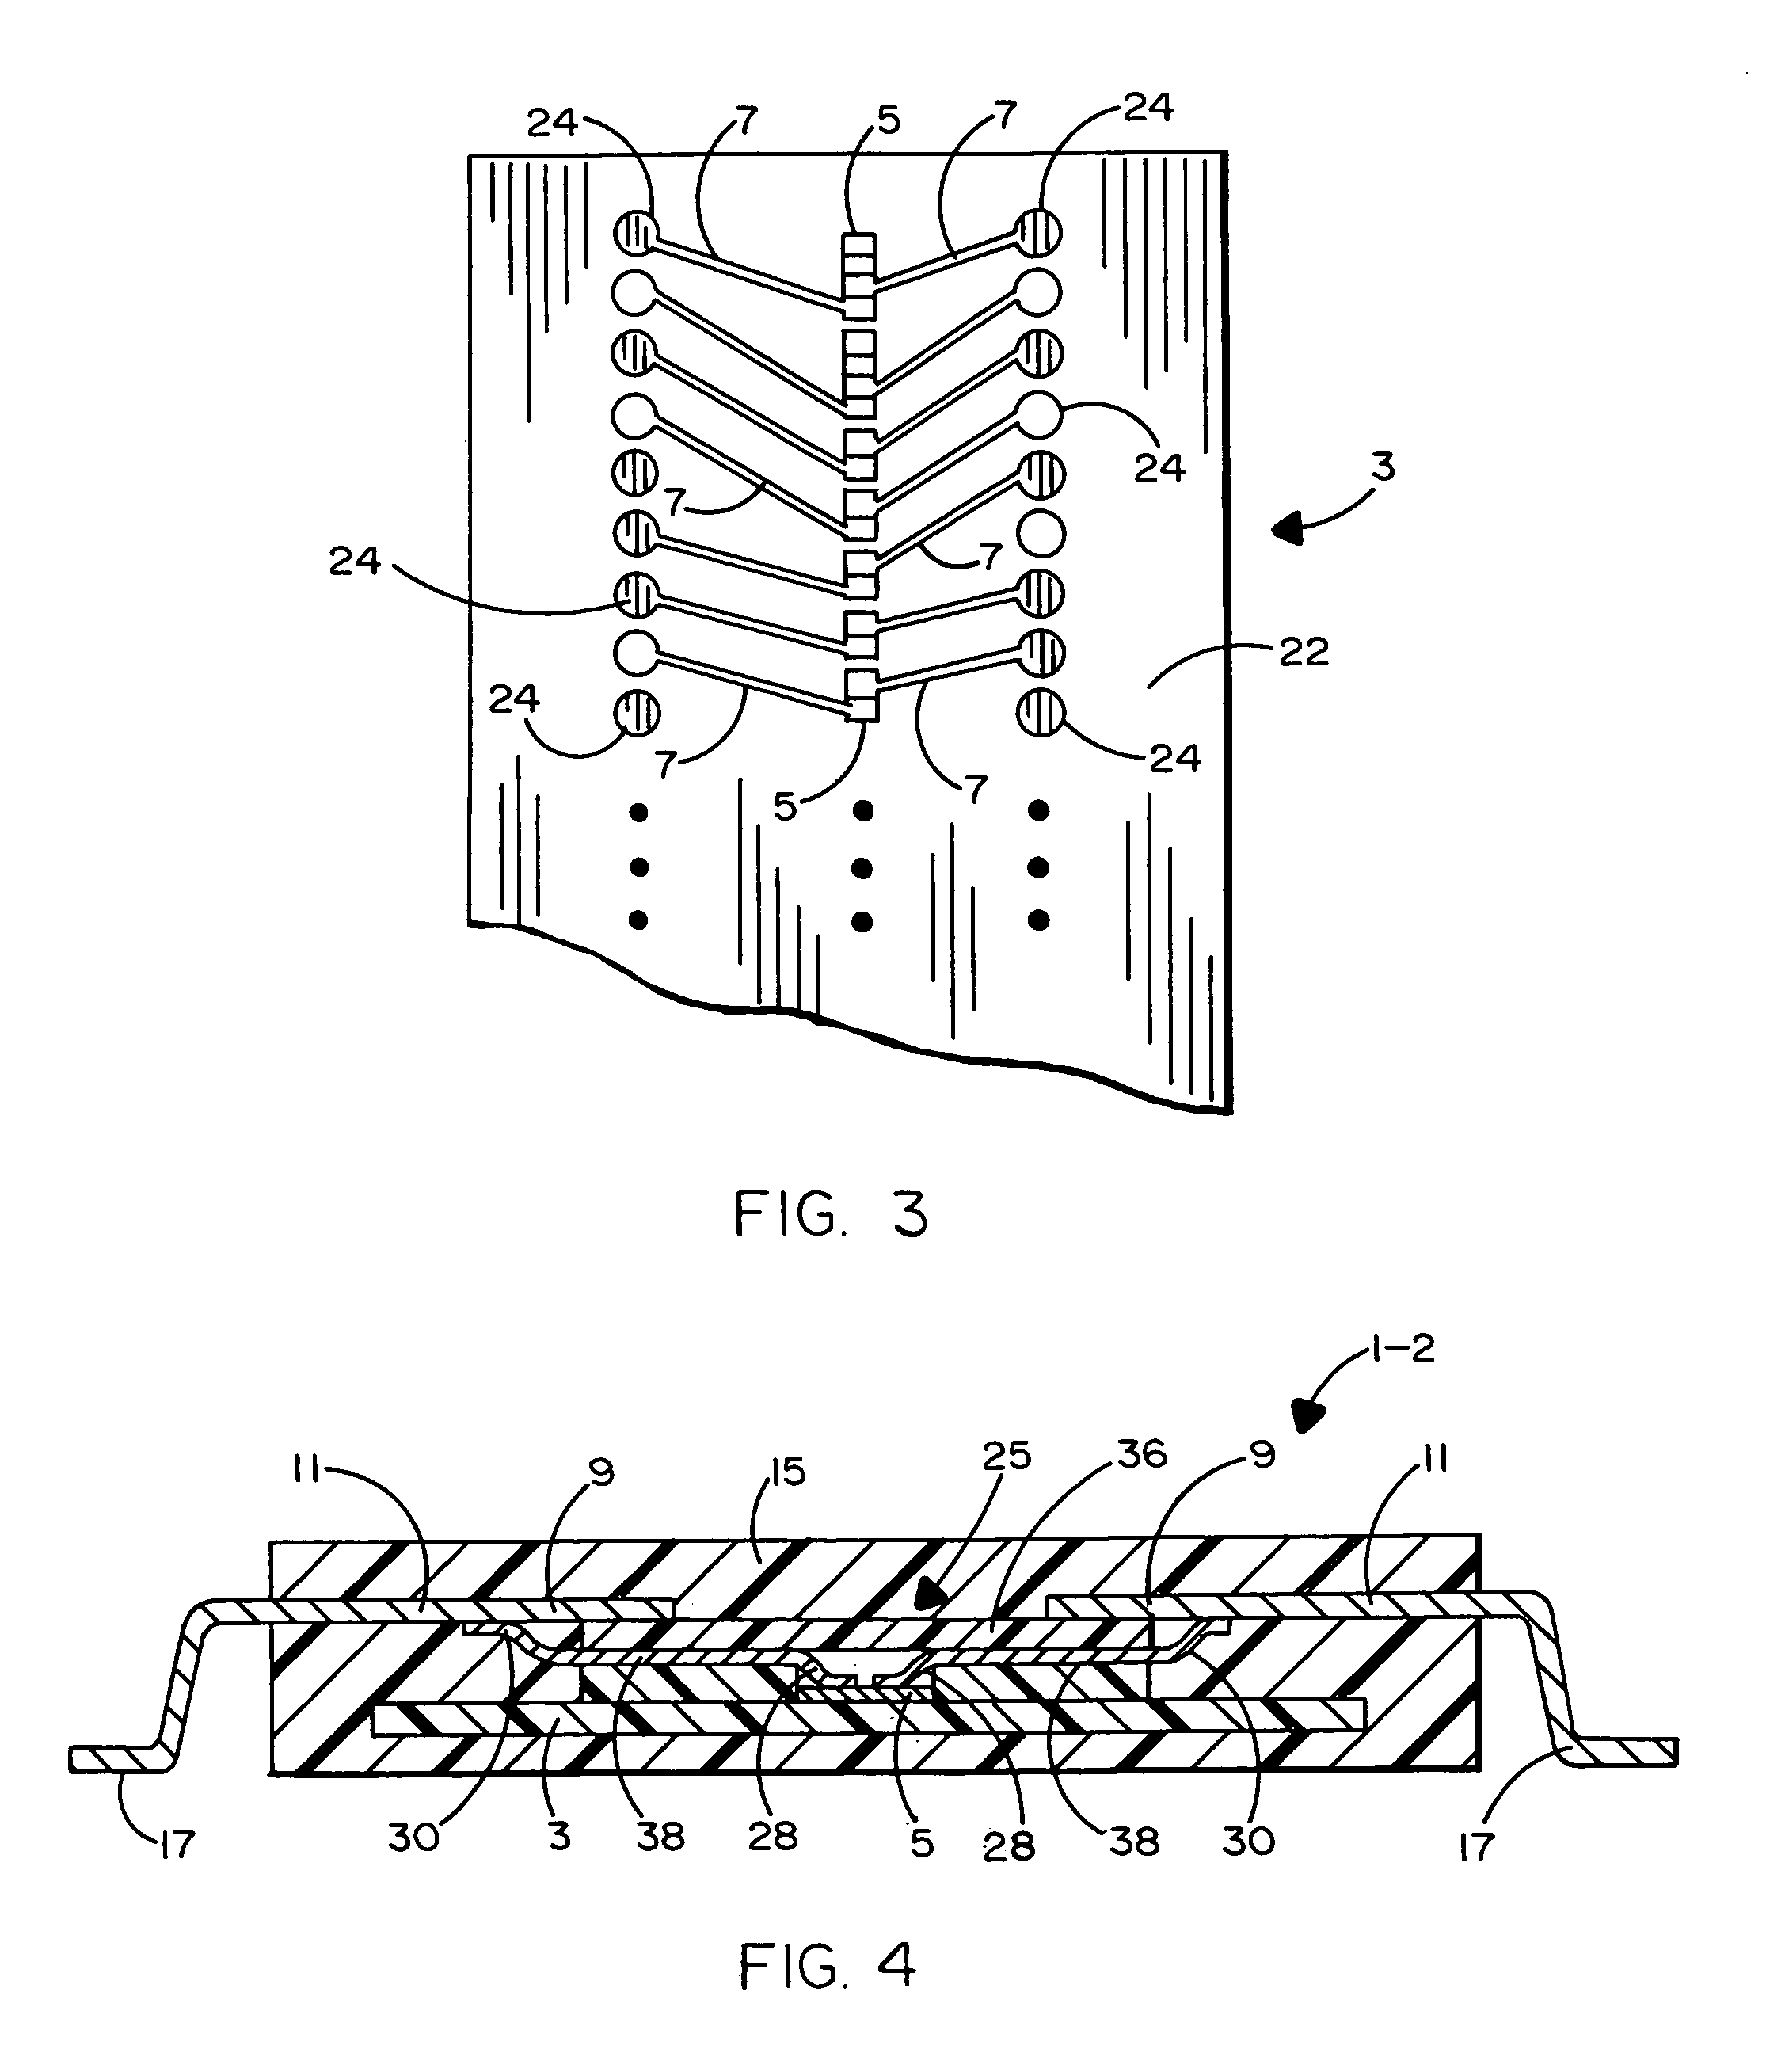 Encapsulated leadframe semiconductor package for random access memory integrated circuits